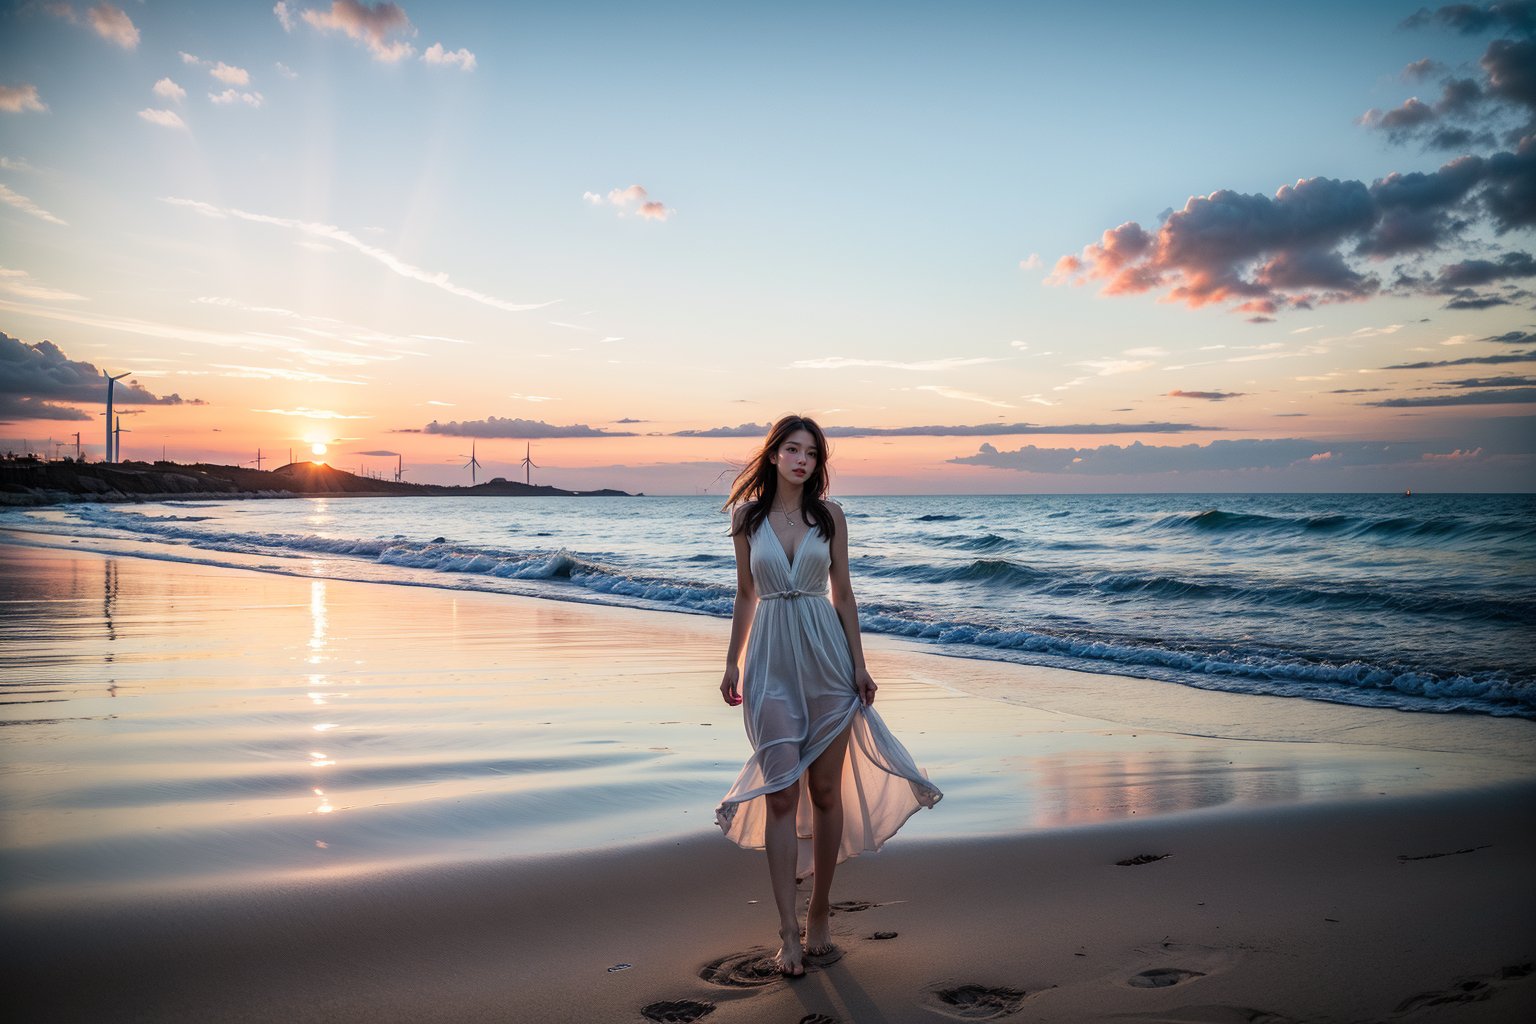 A beautiful sunset scene, Lucky is smiling happily, wearing a flowing summer dress with white lace details, standing barefoot on a quiet beach at sunset, her reflection reflected in the wet sand. There are wind turbines in the background and the sky is tinted in rich pinks, oranges and blues, with scattered clouds adding depth to the scene. The golden light casts a soft, warm glow. Wide-angle lenses capture the vastness of the scenery, shot using high-end photography equipment.